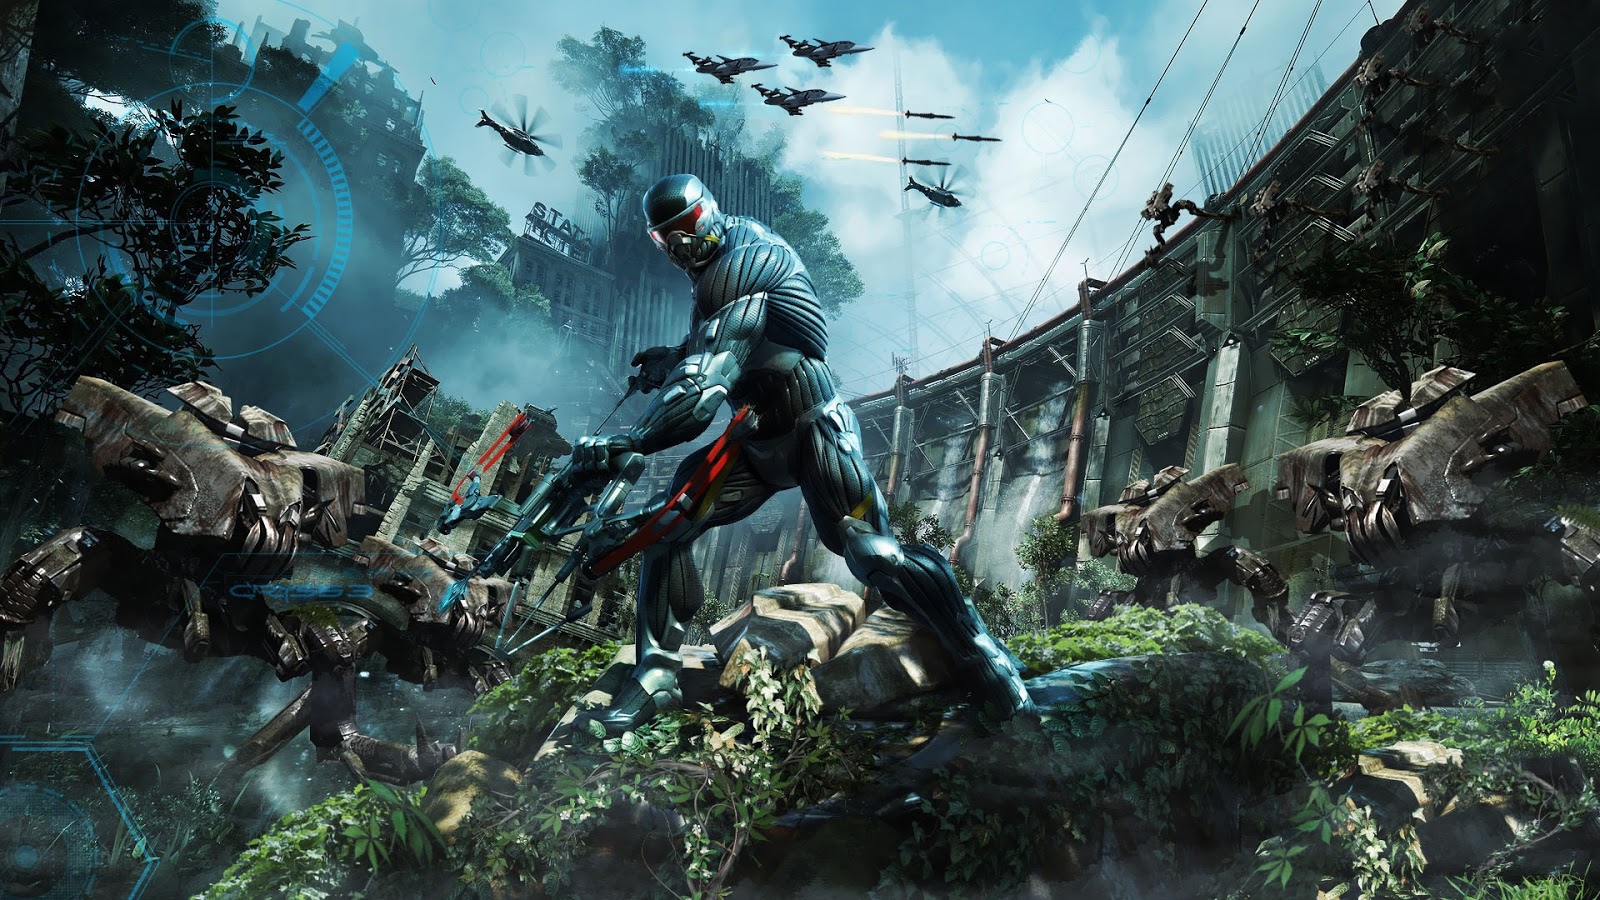 Download Free Photos 2013 3D and Action Games HD Wallpapers 2013